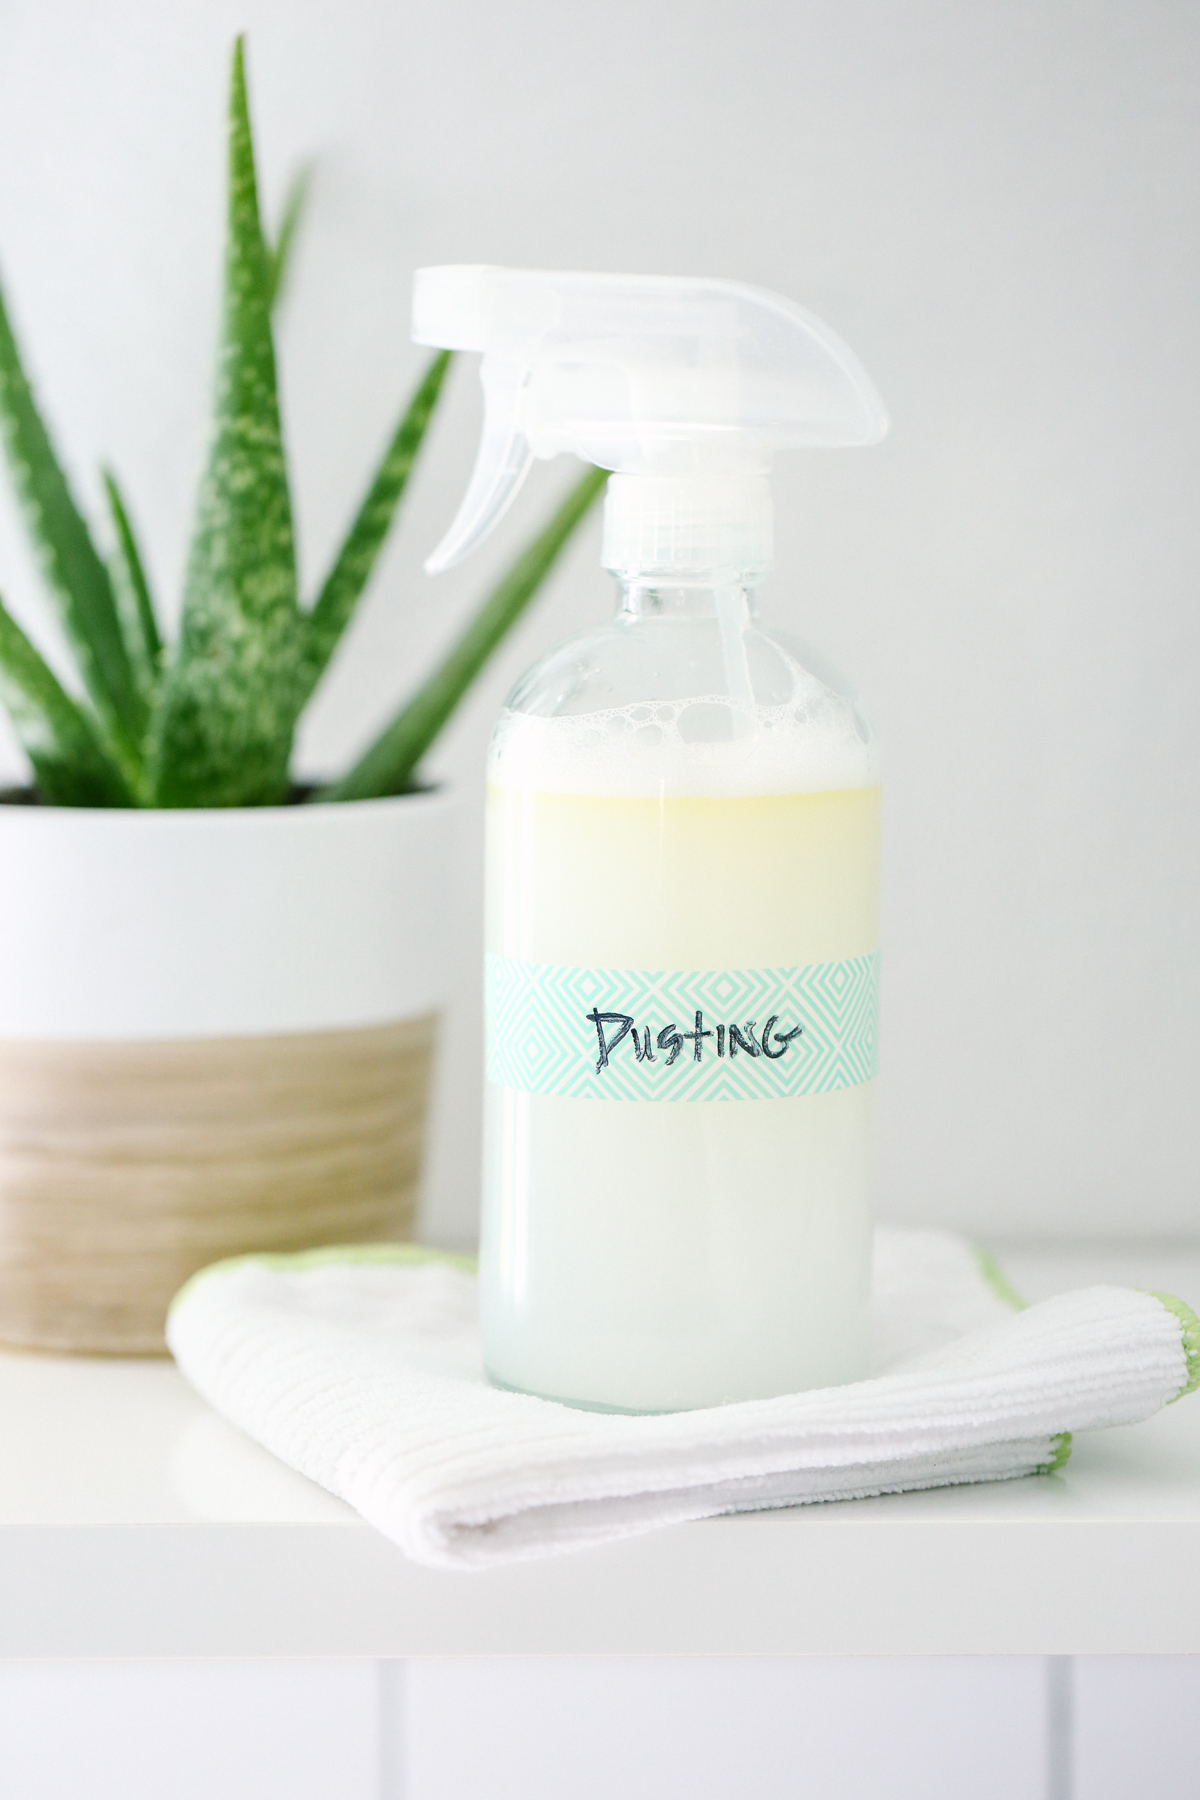 Dusting spray made with castile soap in a glass spray bottle with a turquoise label.